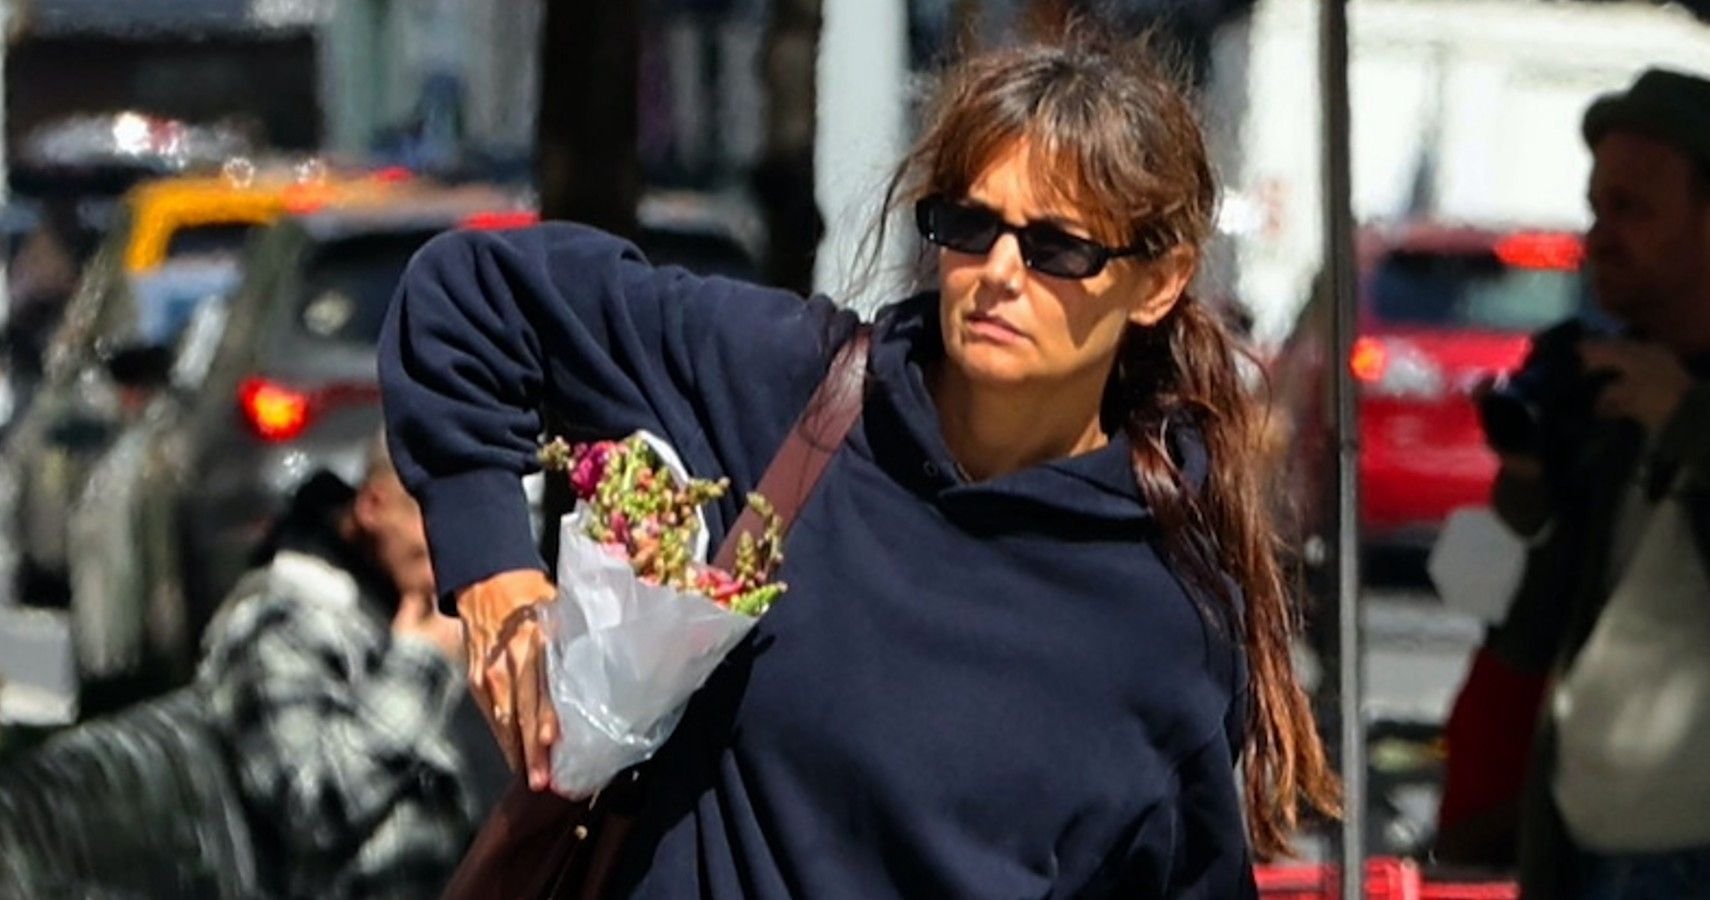 Katie Holmes Looks Unrecognizable As Child Support Payments Are About To Stop